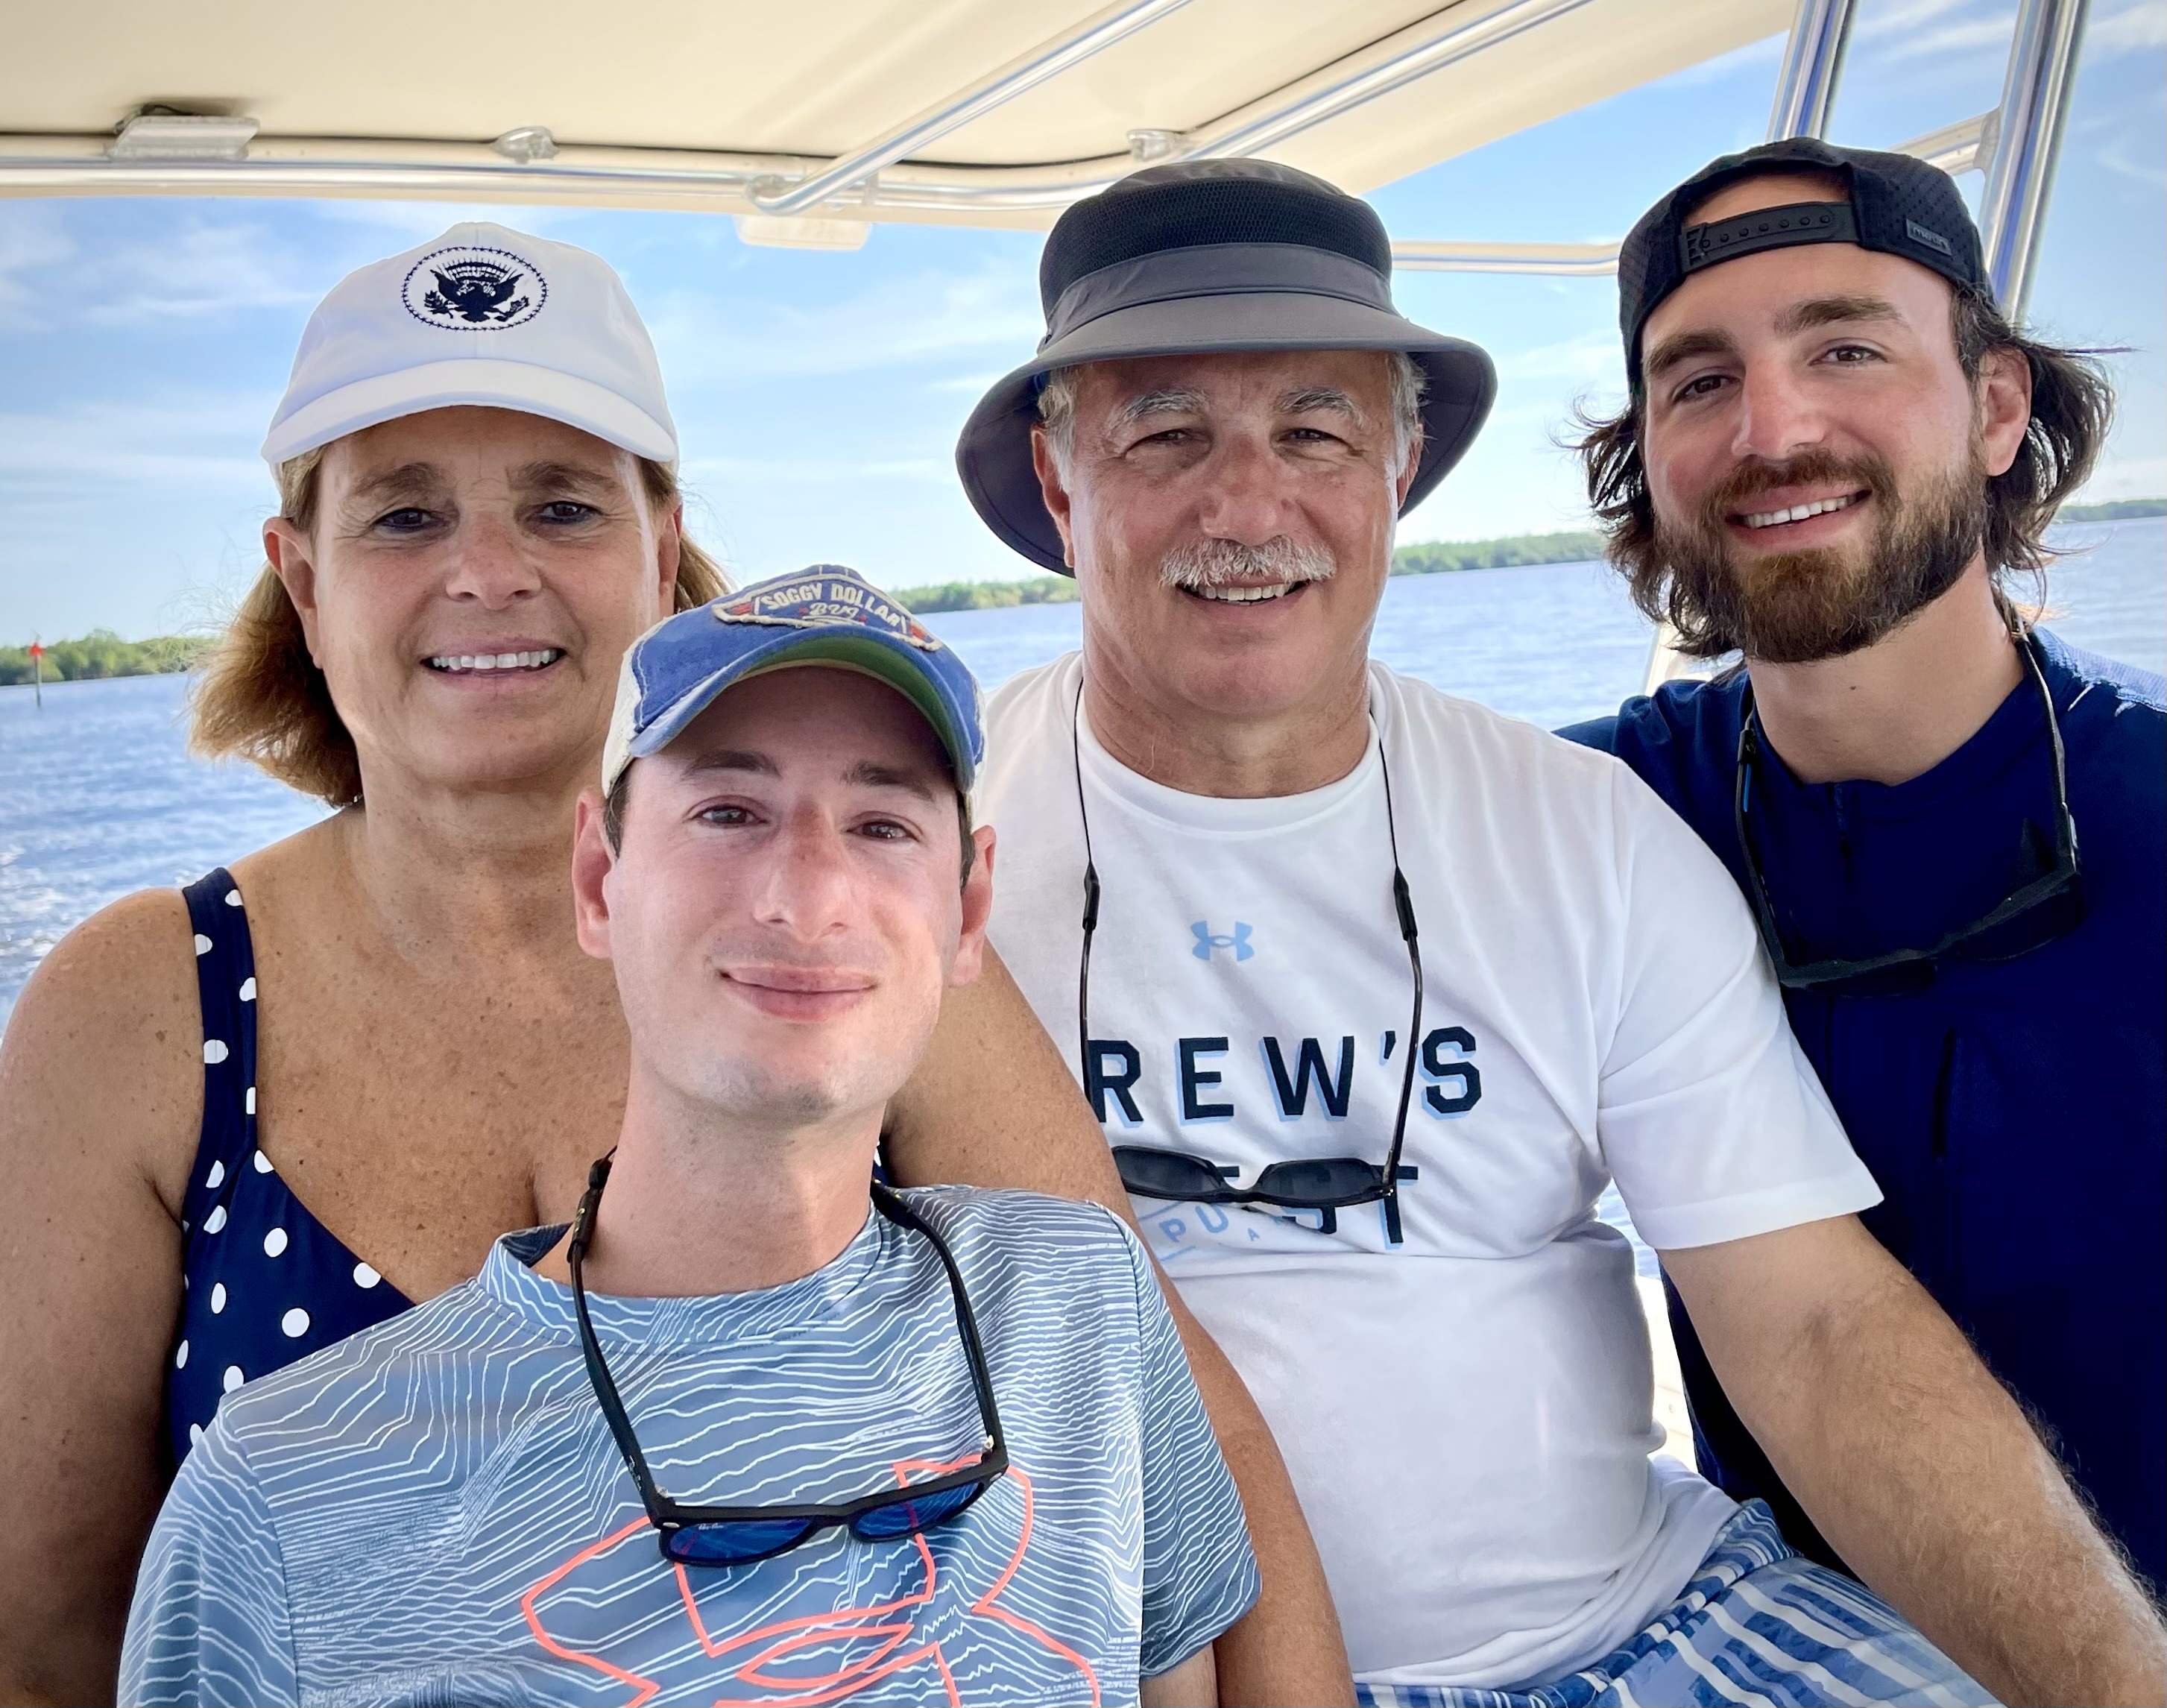 Family on a boat, smiling